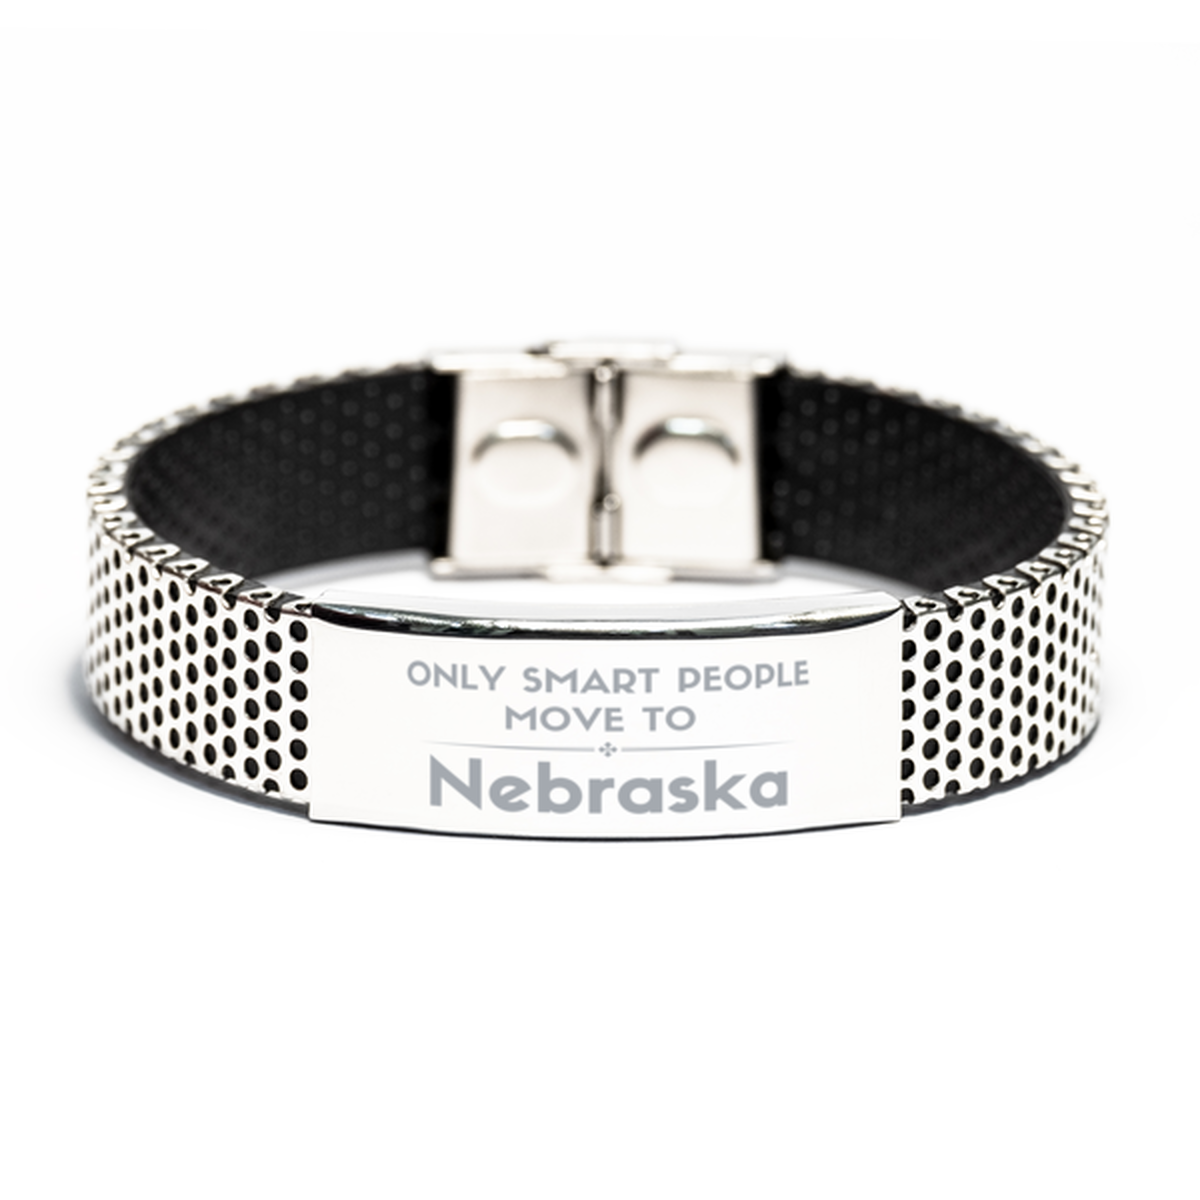 Only smart people move to Nebraska Stainless Steel Bracelet, Gag Gifts For Nebraska, Move to Nebraska Gifts for Friends Coworker Funny Saying Quote